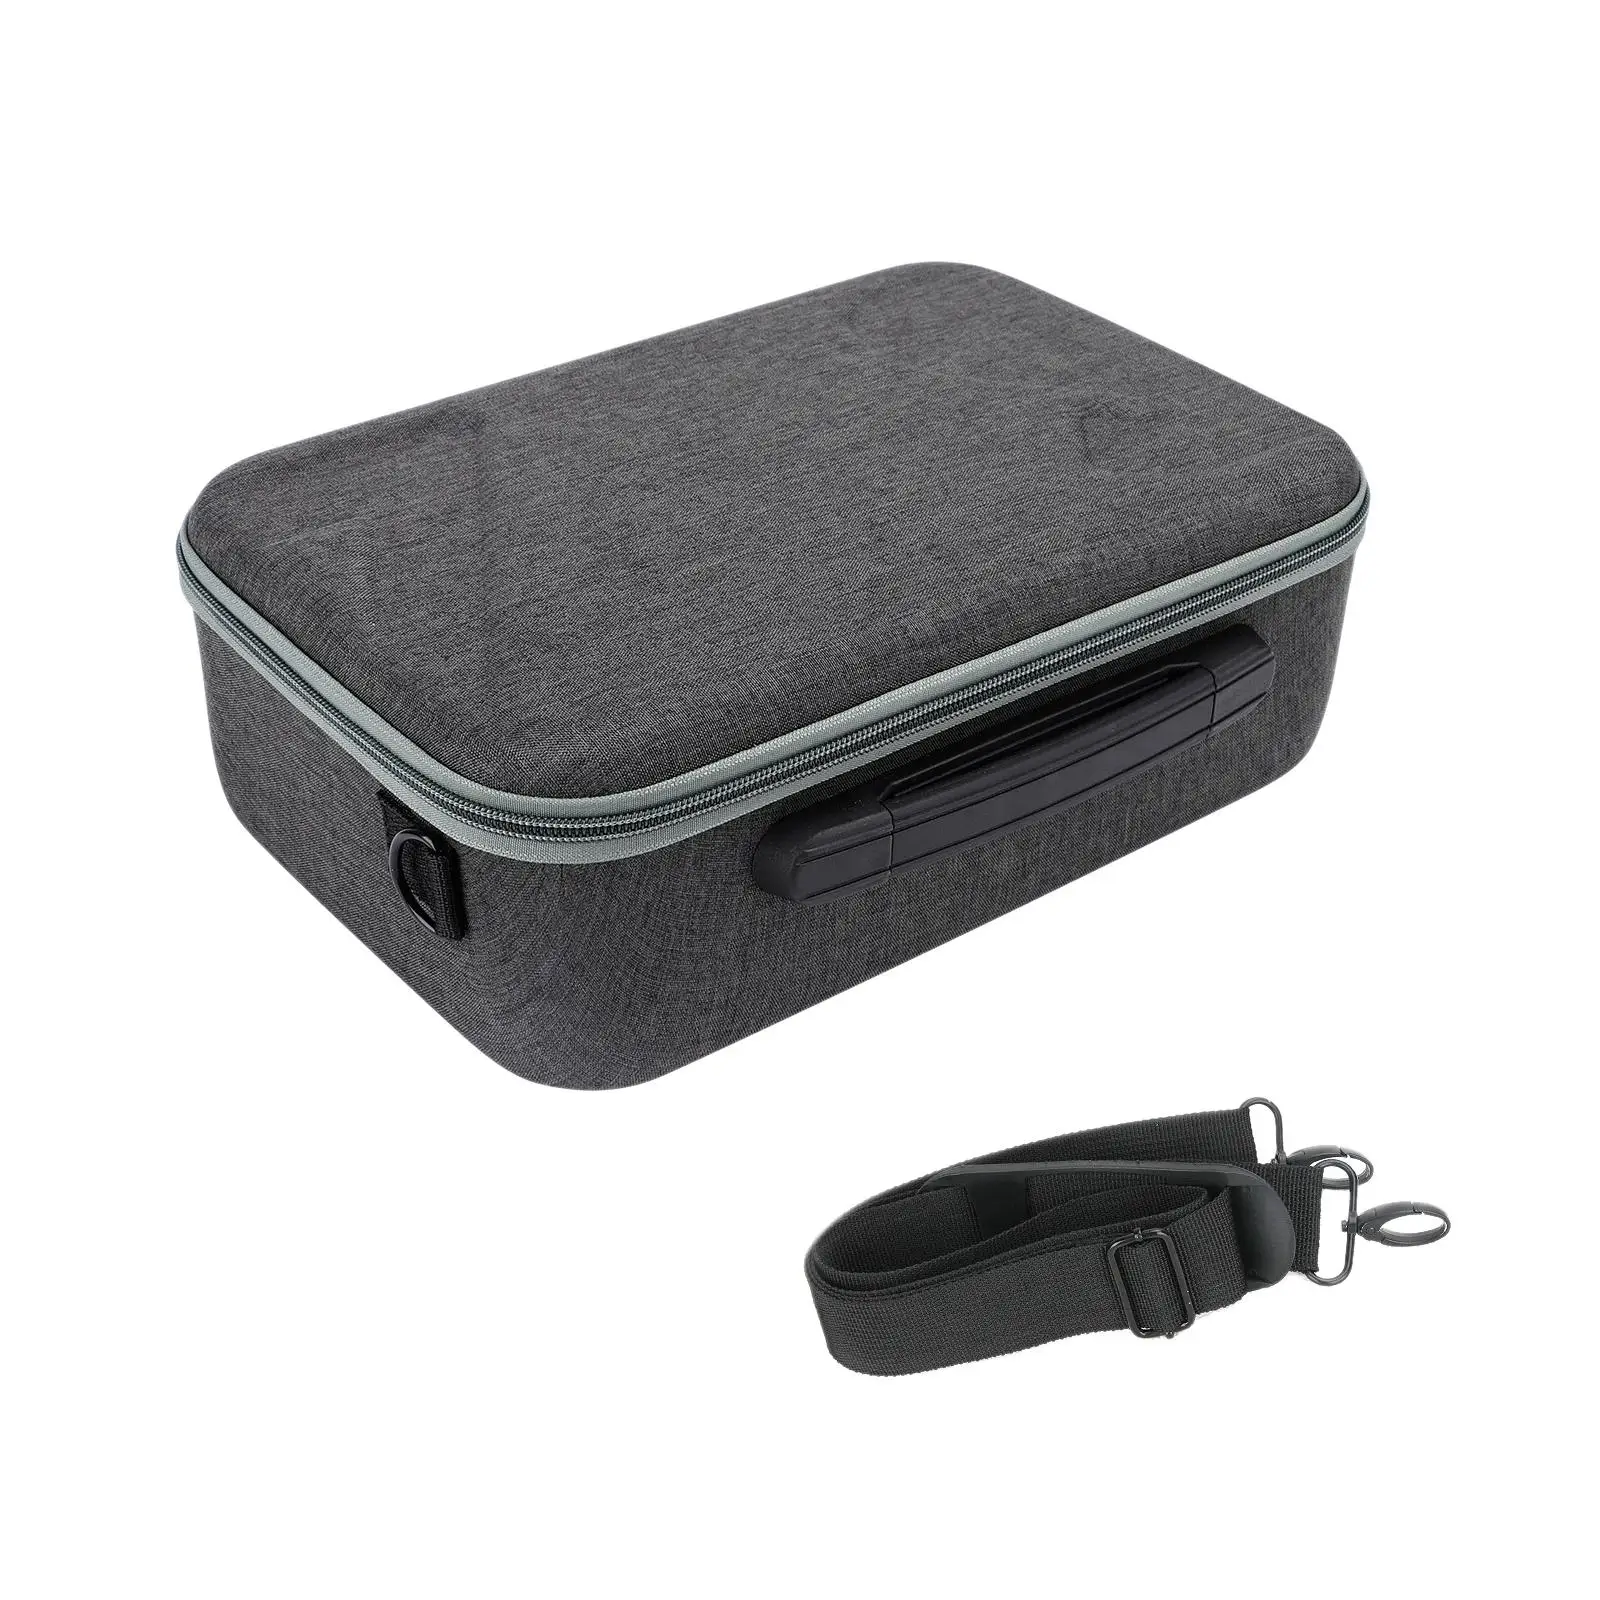 Portable Protective Suitcase for RS 3 Mini Accessories Color Black Shock Absorption and Compression Professional